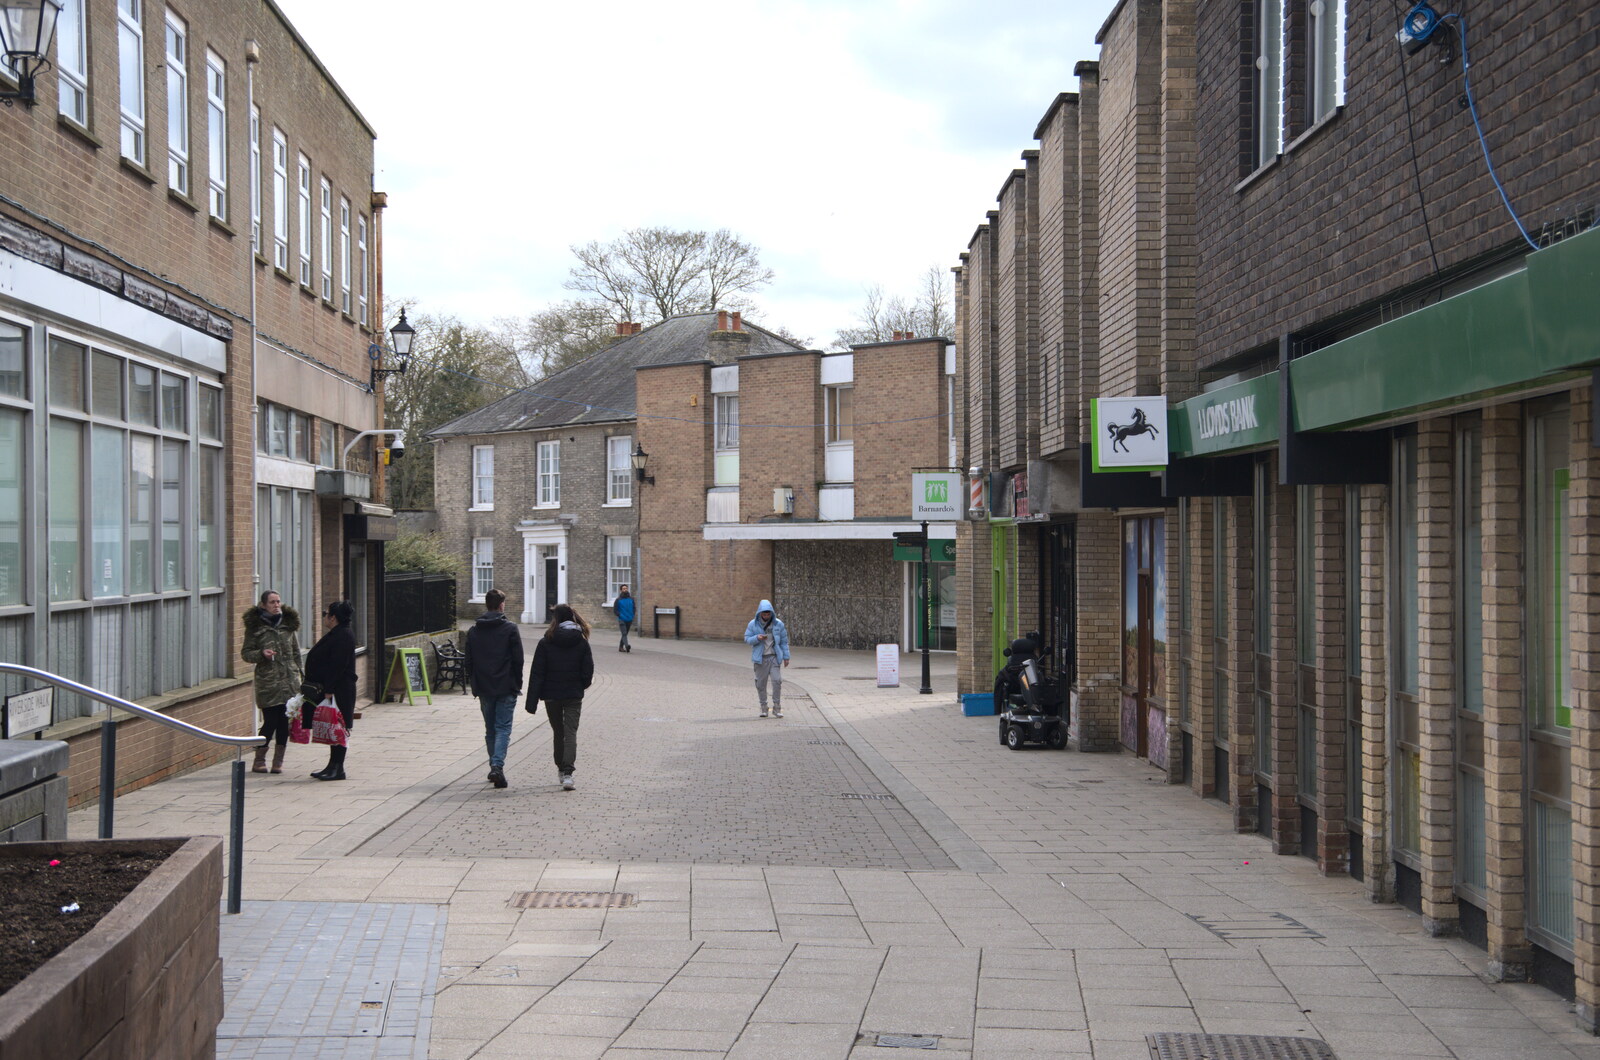 Tanner Street, with Lloyds Bank from A Postcard from Thetford, Norfolk - 15th March 2023